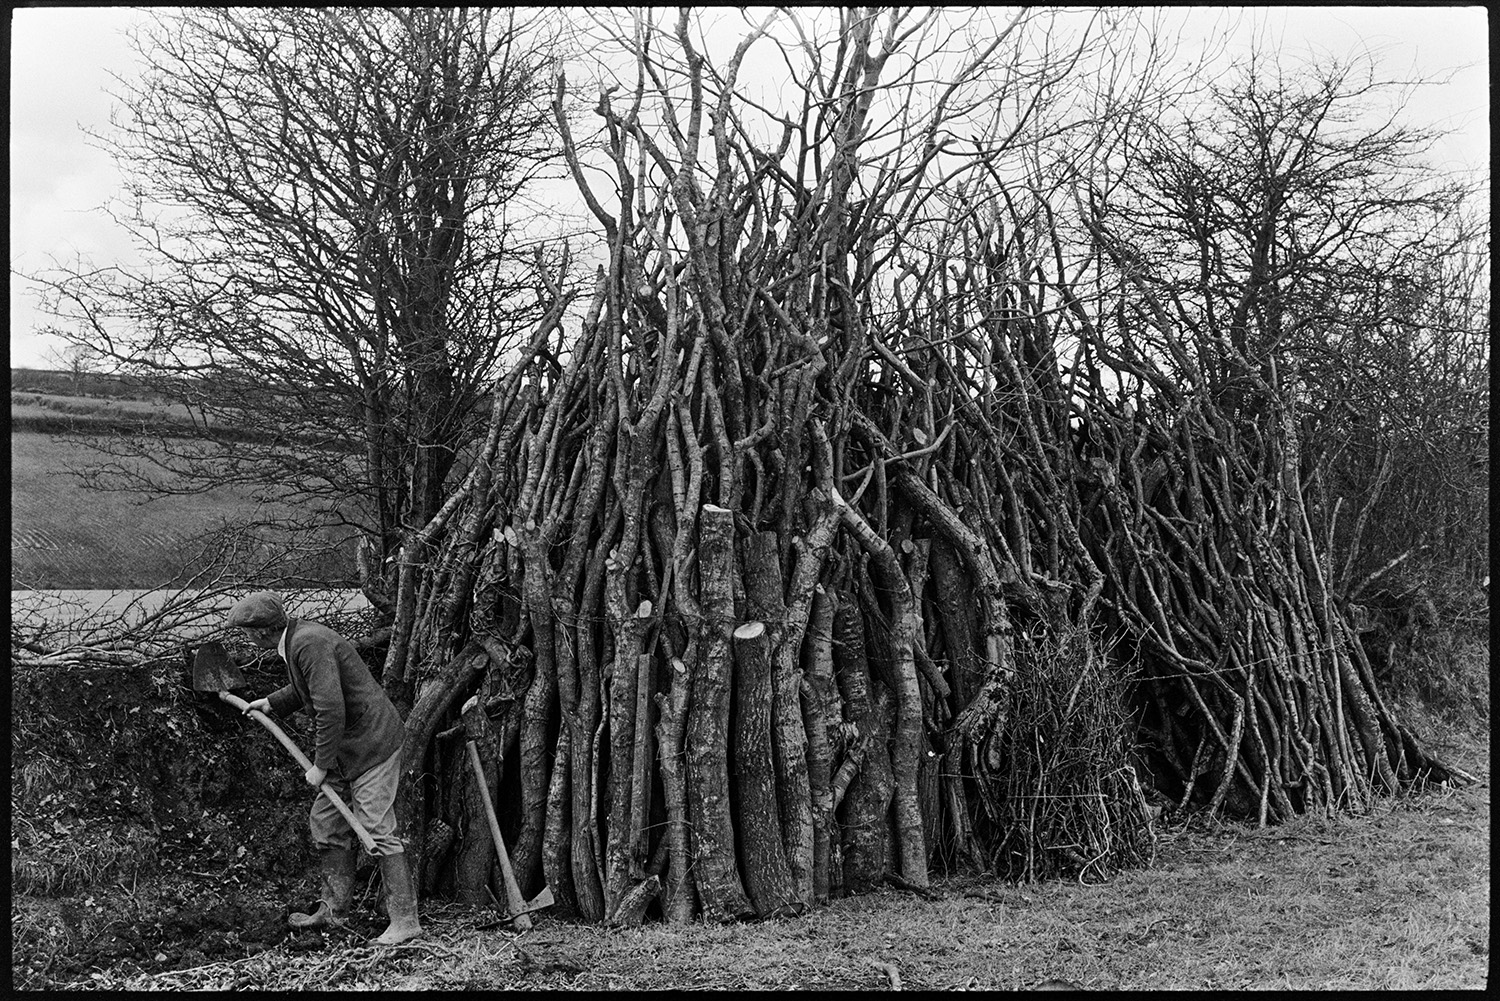 Man building up turf hedgebank (clatting), next to woodpile. 
[Mr Allin clatting, or building up a hedge with turf, next to a woodpile at Rectory Road, Dolton. He is using a shovel.]